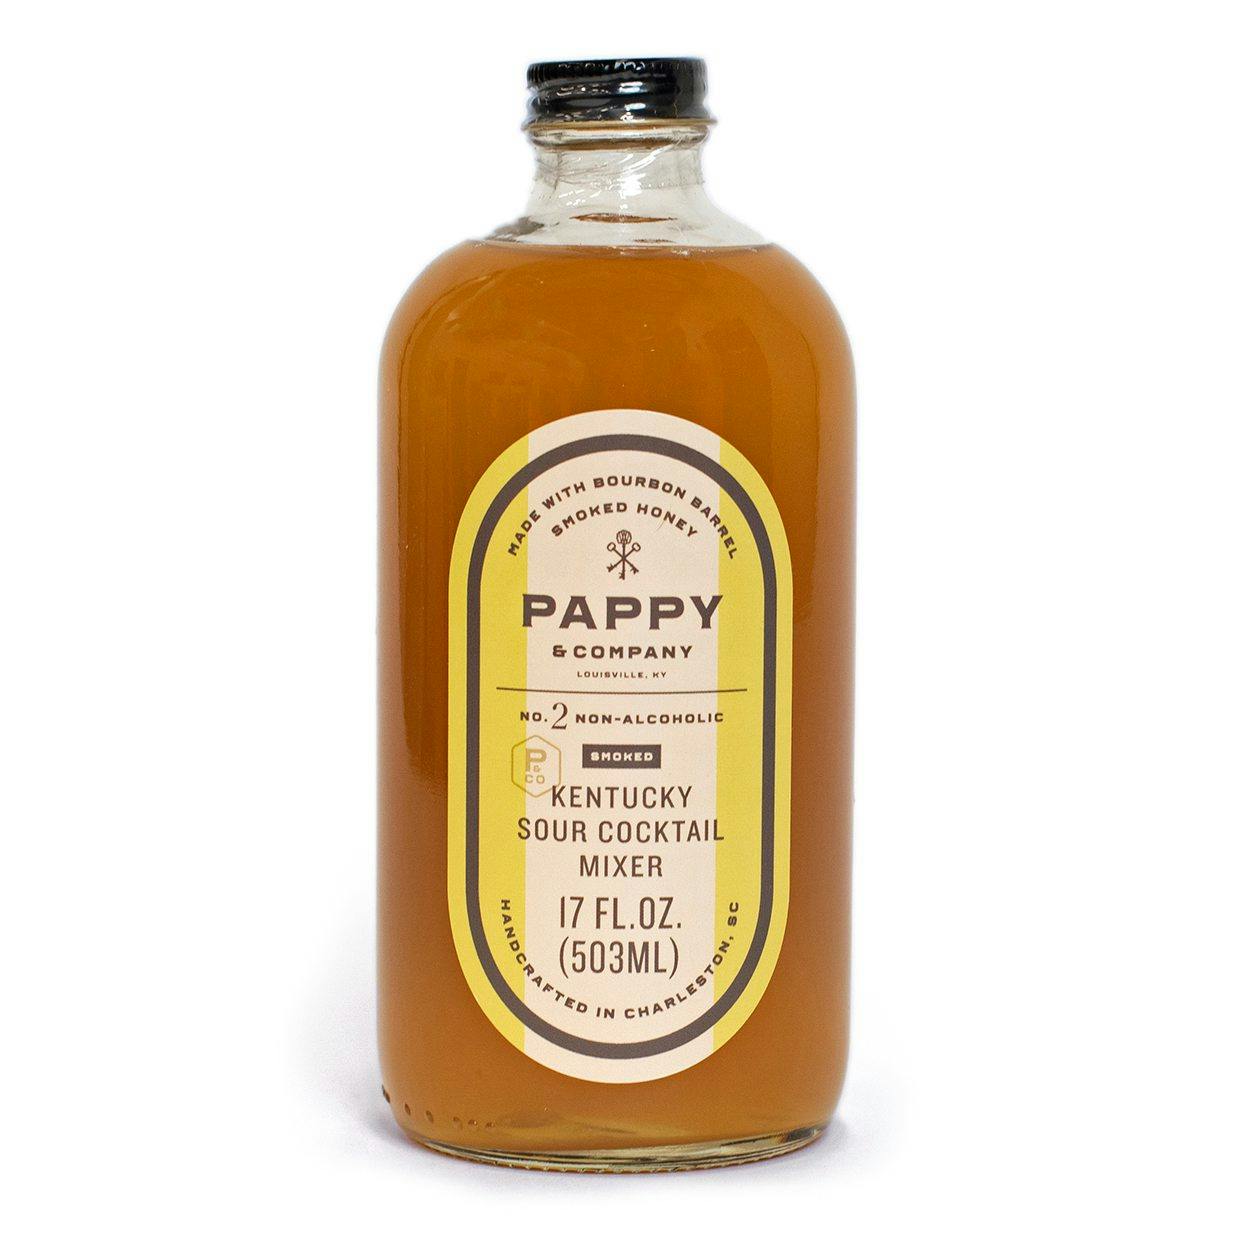 https://huckberry.imgix.net/spree/products/716291/original/83554_Pappy_and_Company_Kentucky_Sour_Cocktail_Mixer_Brown_01_.jpg?auto=format%2C%20compress&crop=top&fit=clip&cs=tinysrgb&ixlib=react-9.5.2